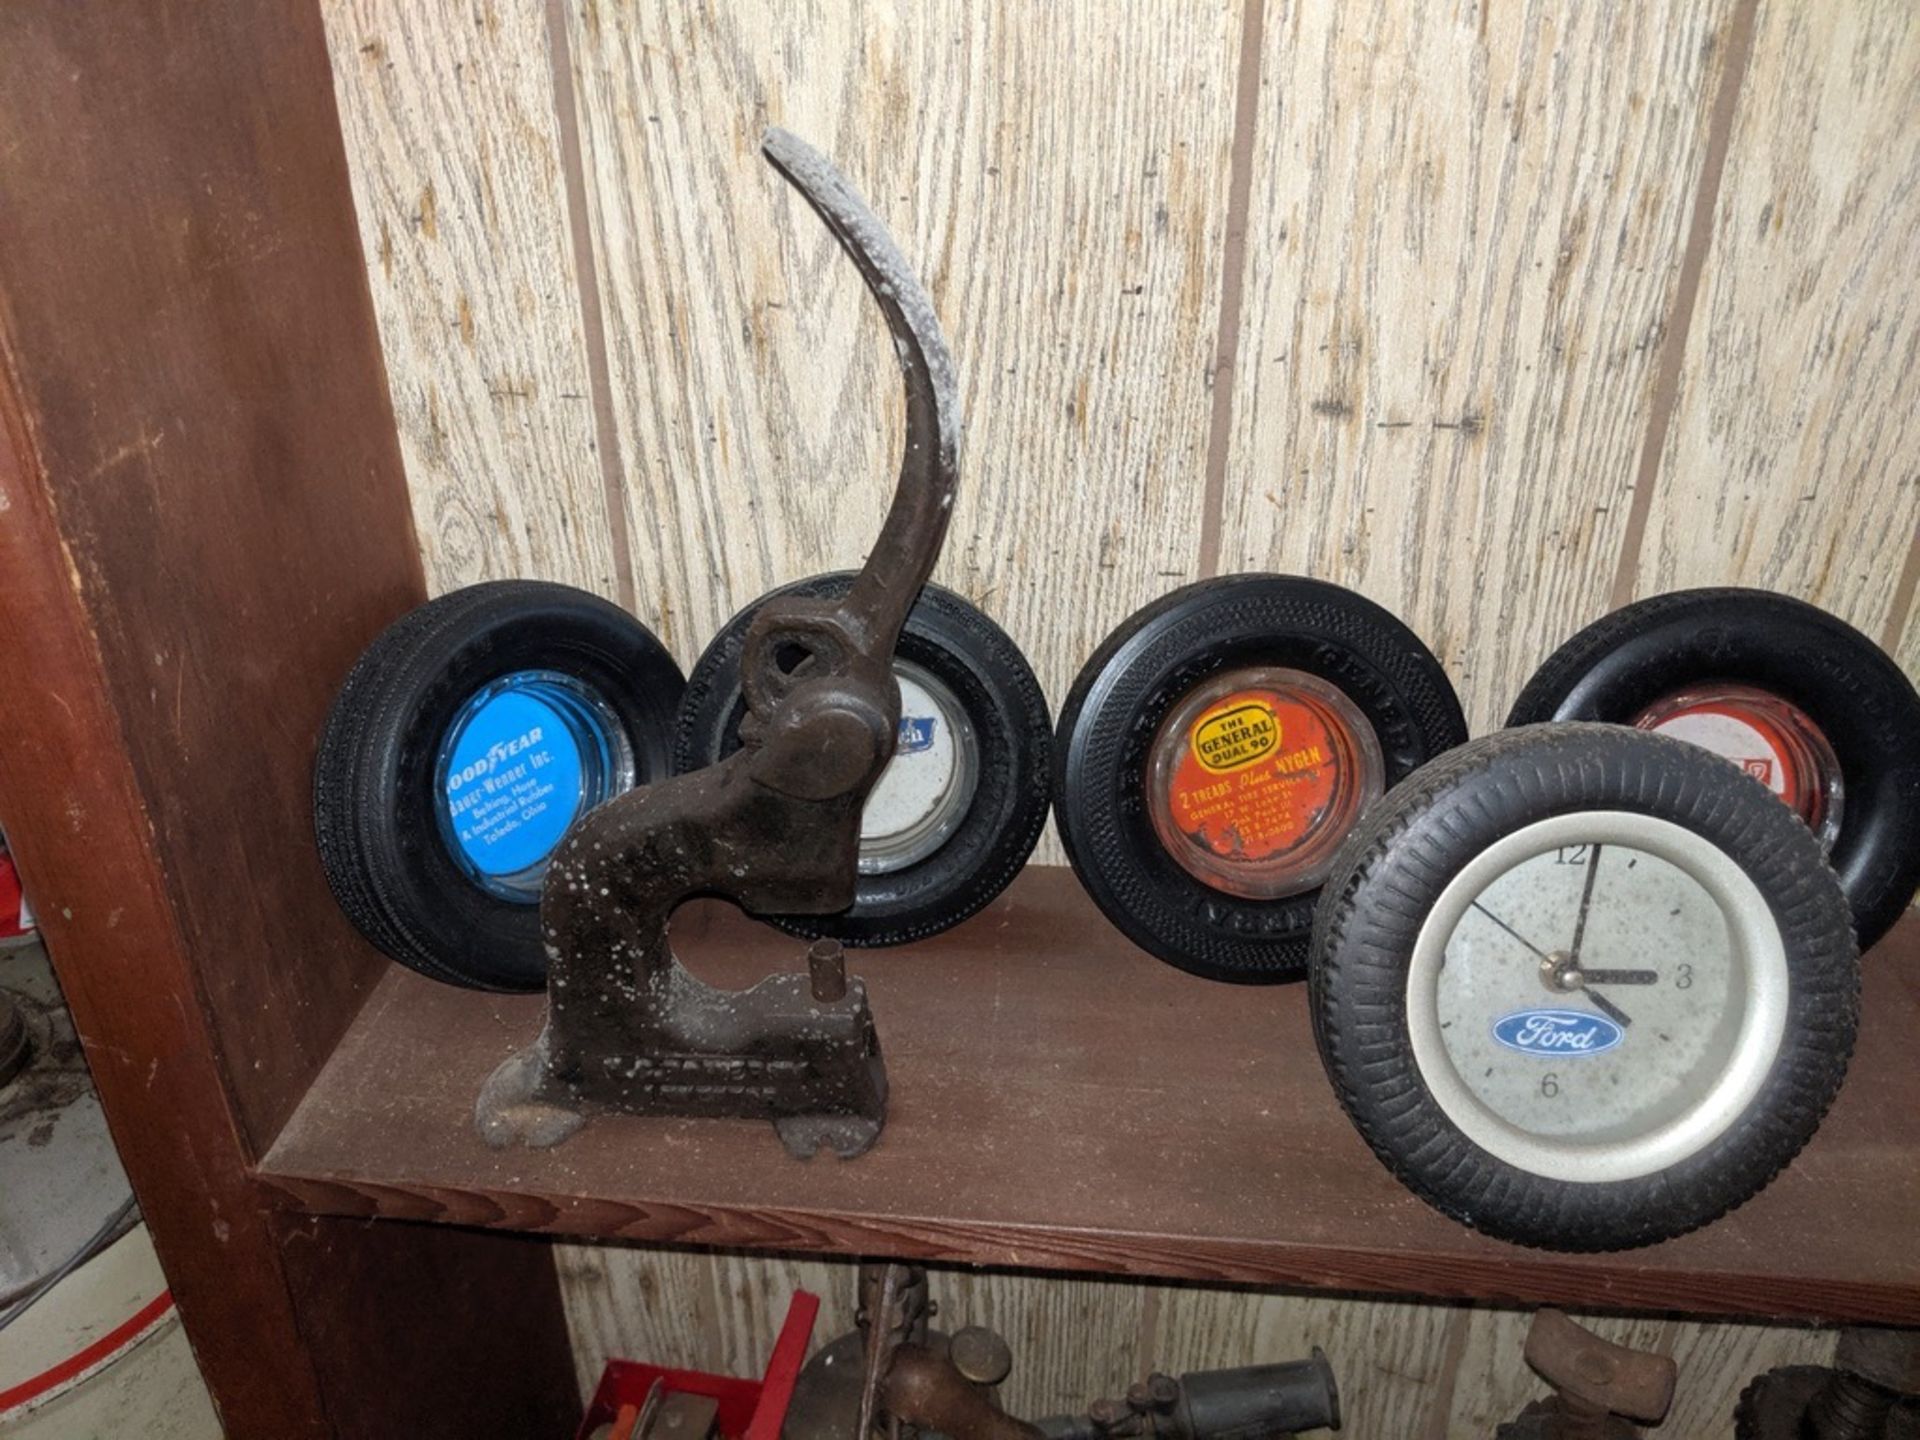 Tire Type Ashtrays and Ford Tire Clock